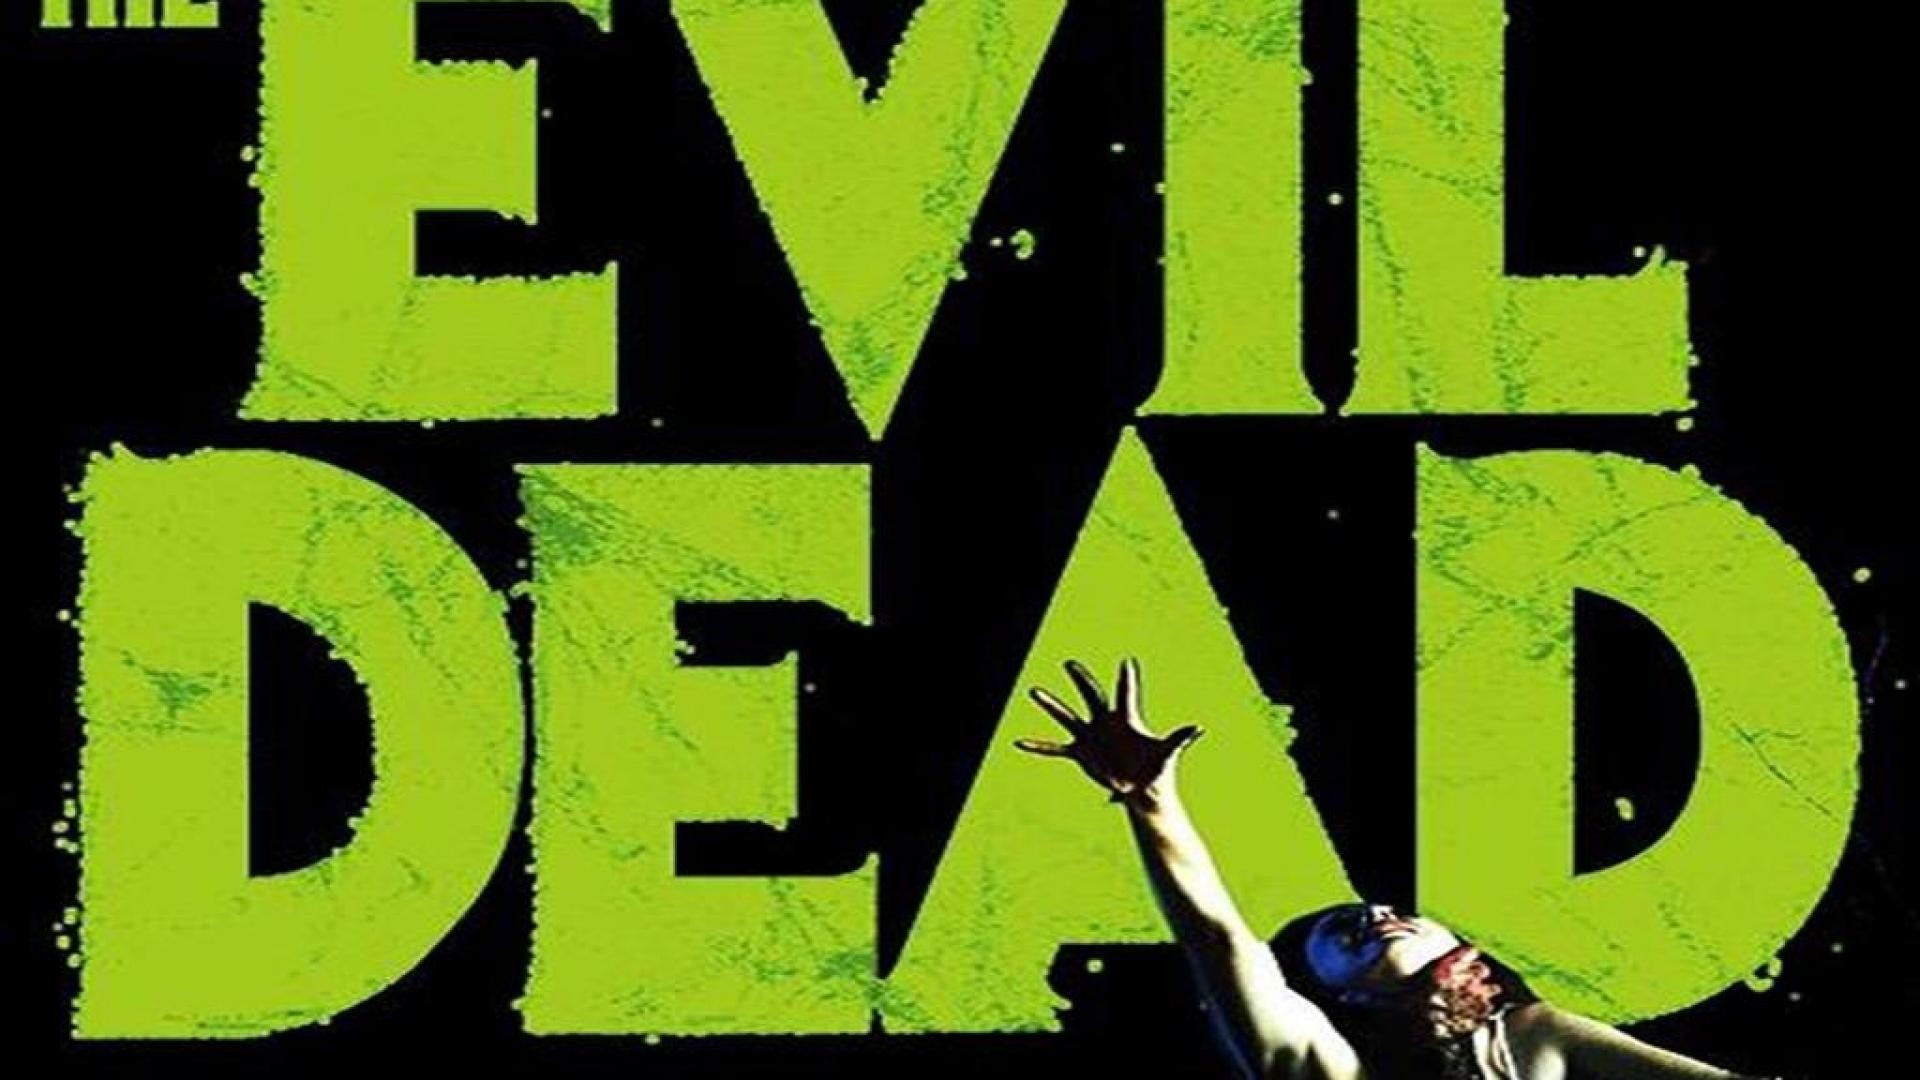 1920x1080 The evil dead - (#124927) - High Quality and Resolution Wallpapers on .